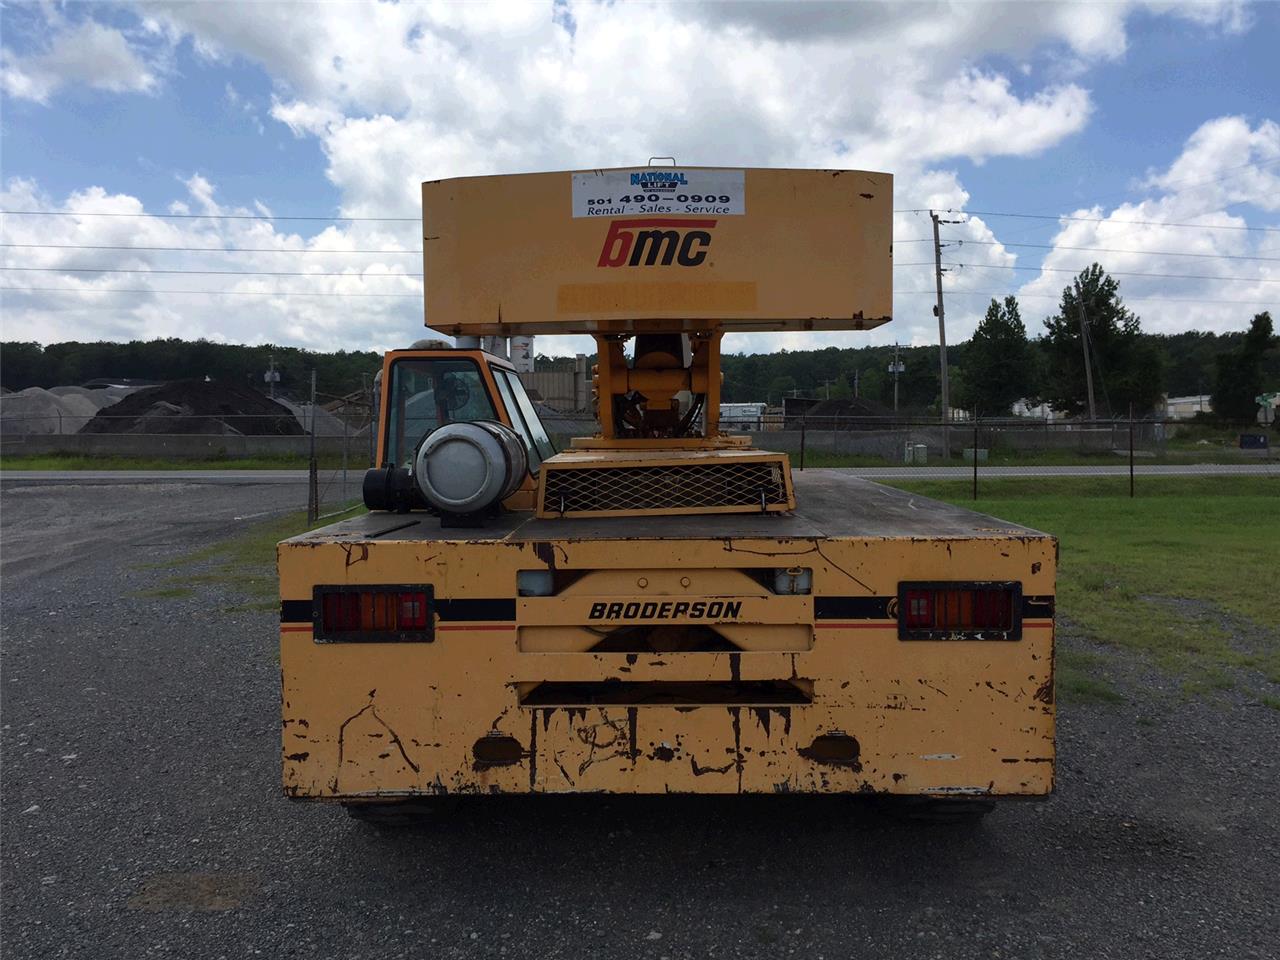 New or Used Rental Broderson IC-200-3F   | lift truck rental for sale | National Lift of Arkansas